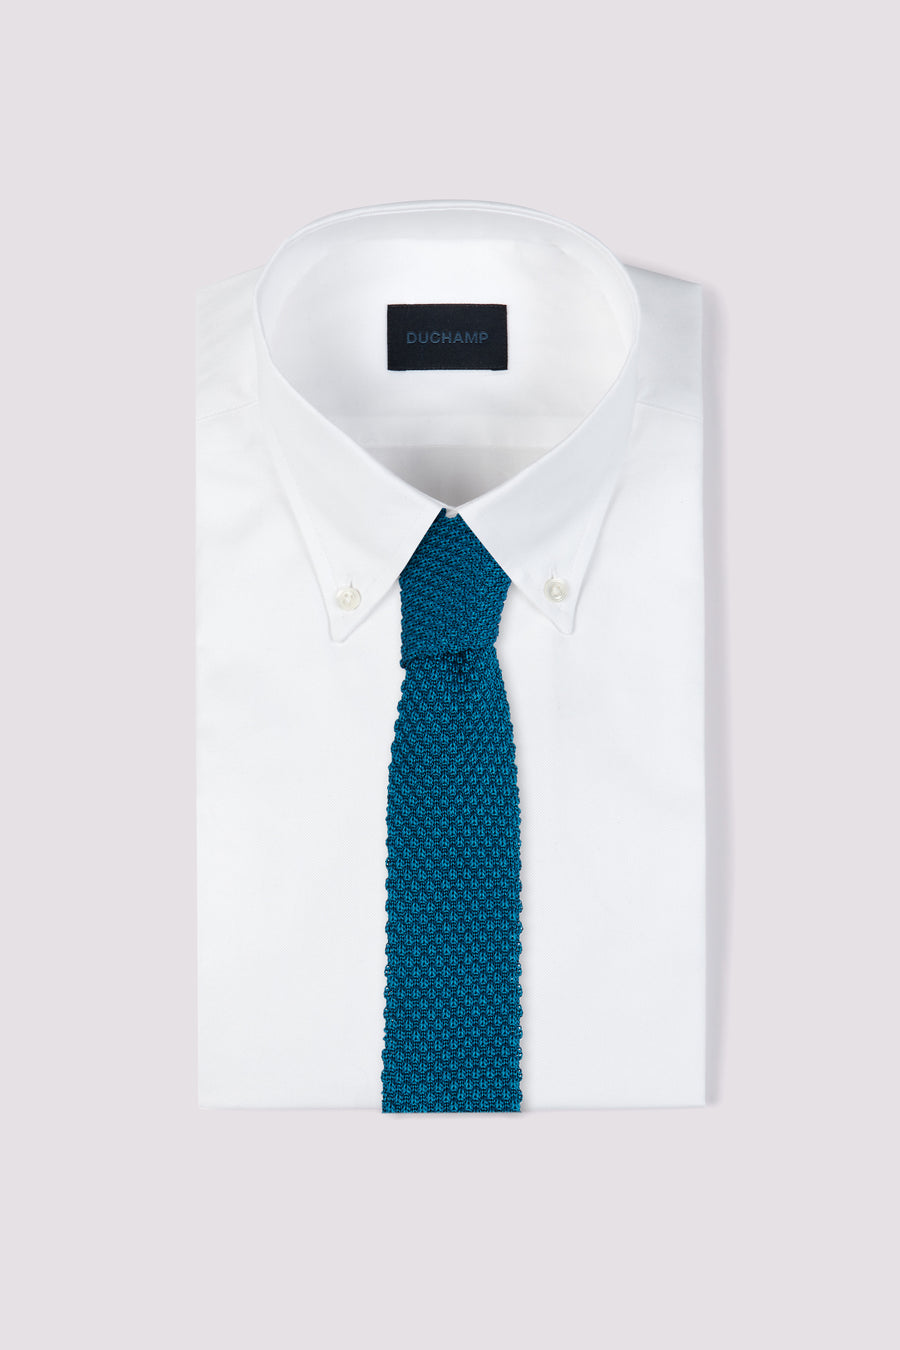 100% Silk Knitted Tie in Teal Blue